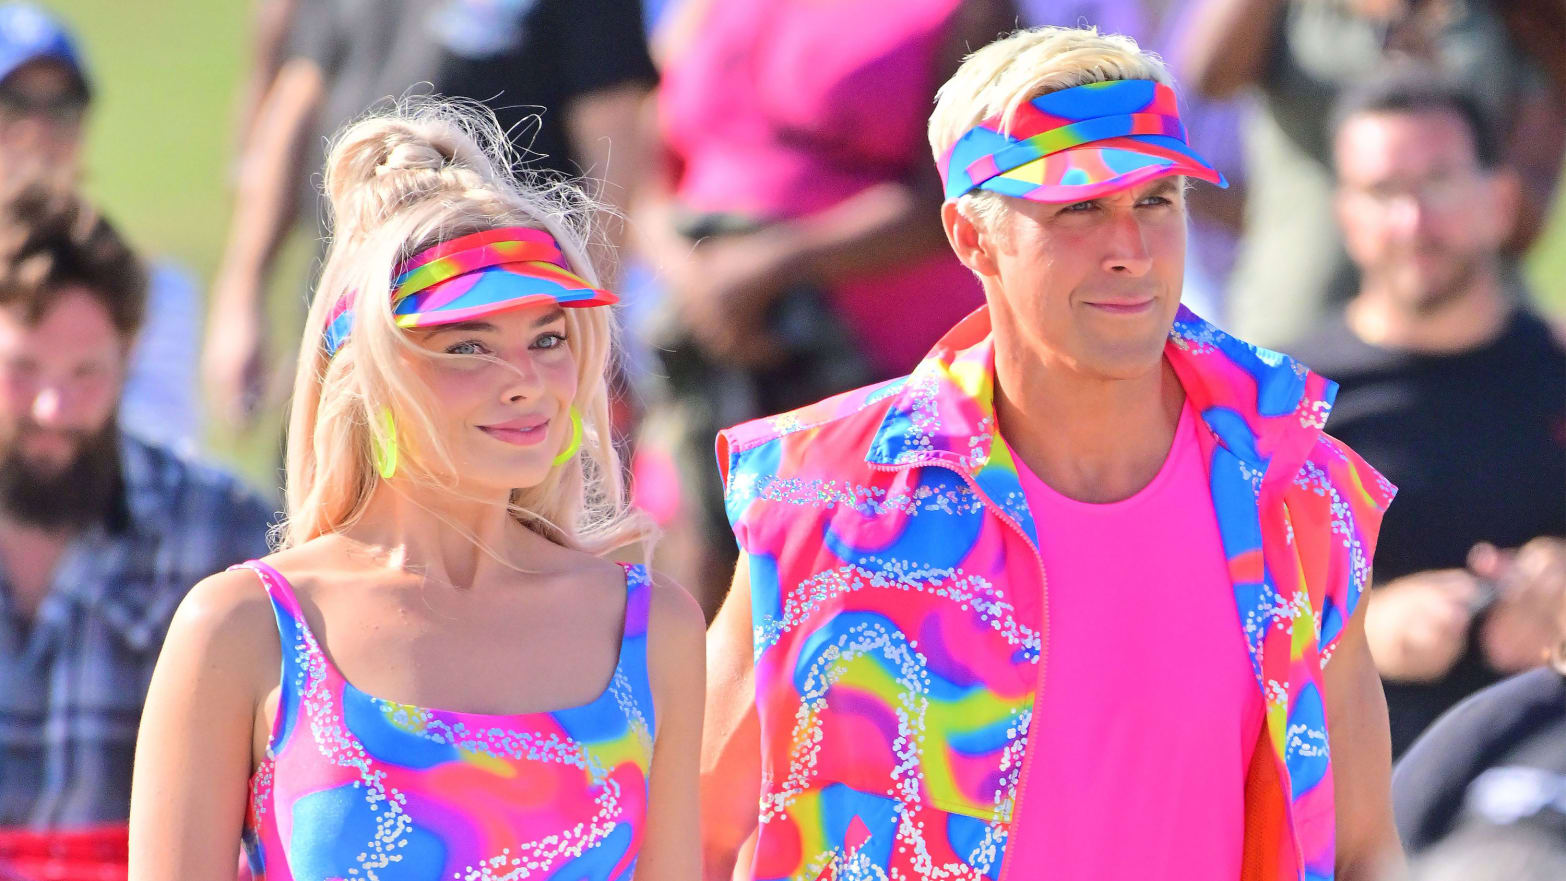 'Barbie' Set Photos Margot Robbie and Ryan Gosling Have Gotten Out Control